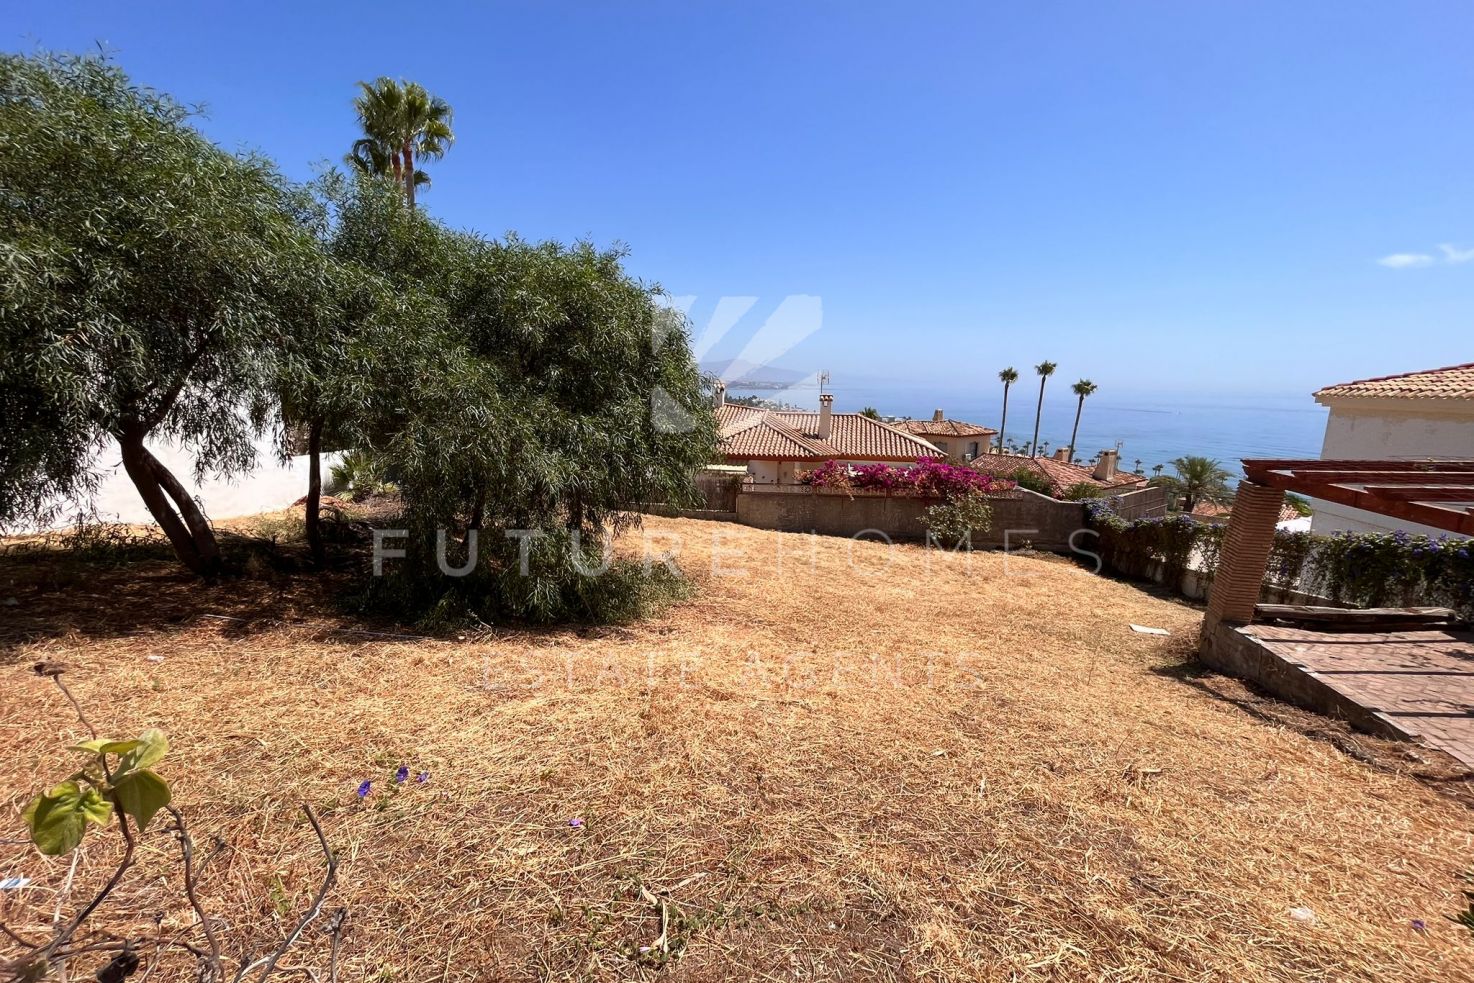 URBAN PLOT IN ELEVATED POSITION OFFERING GREAT SEA VIEWS.